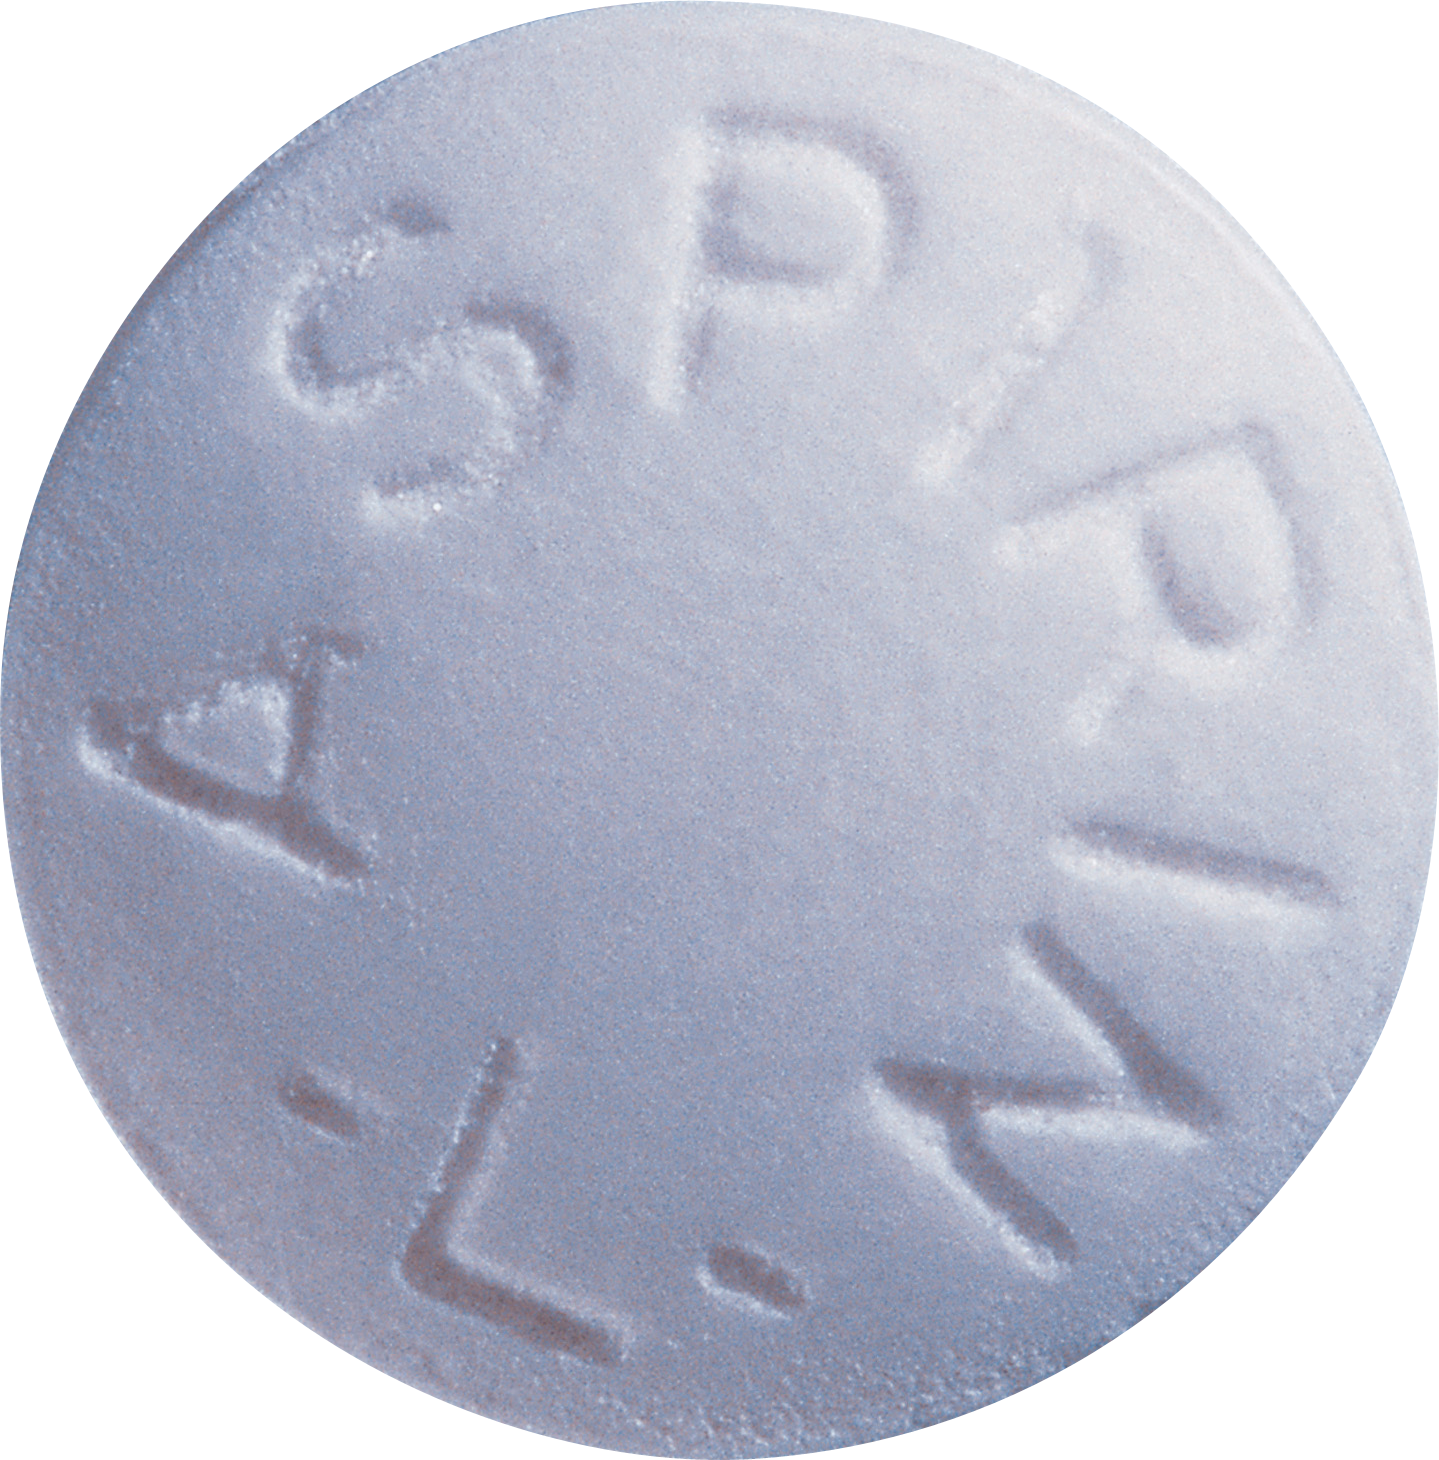 A White Round Object With Writing On It